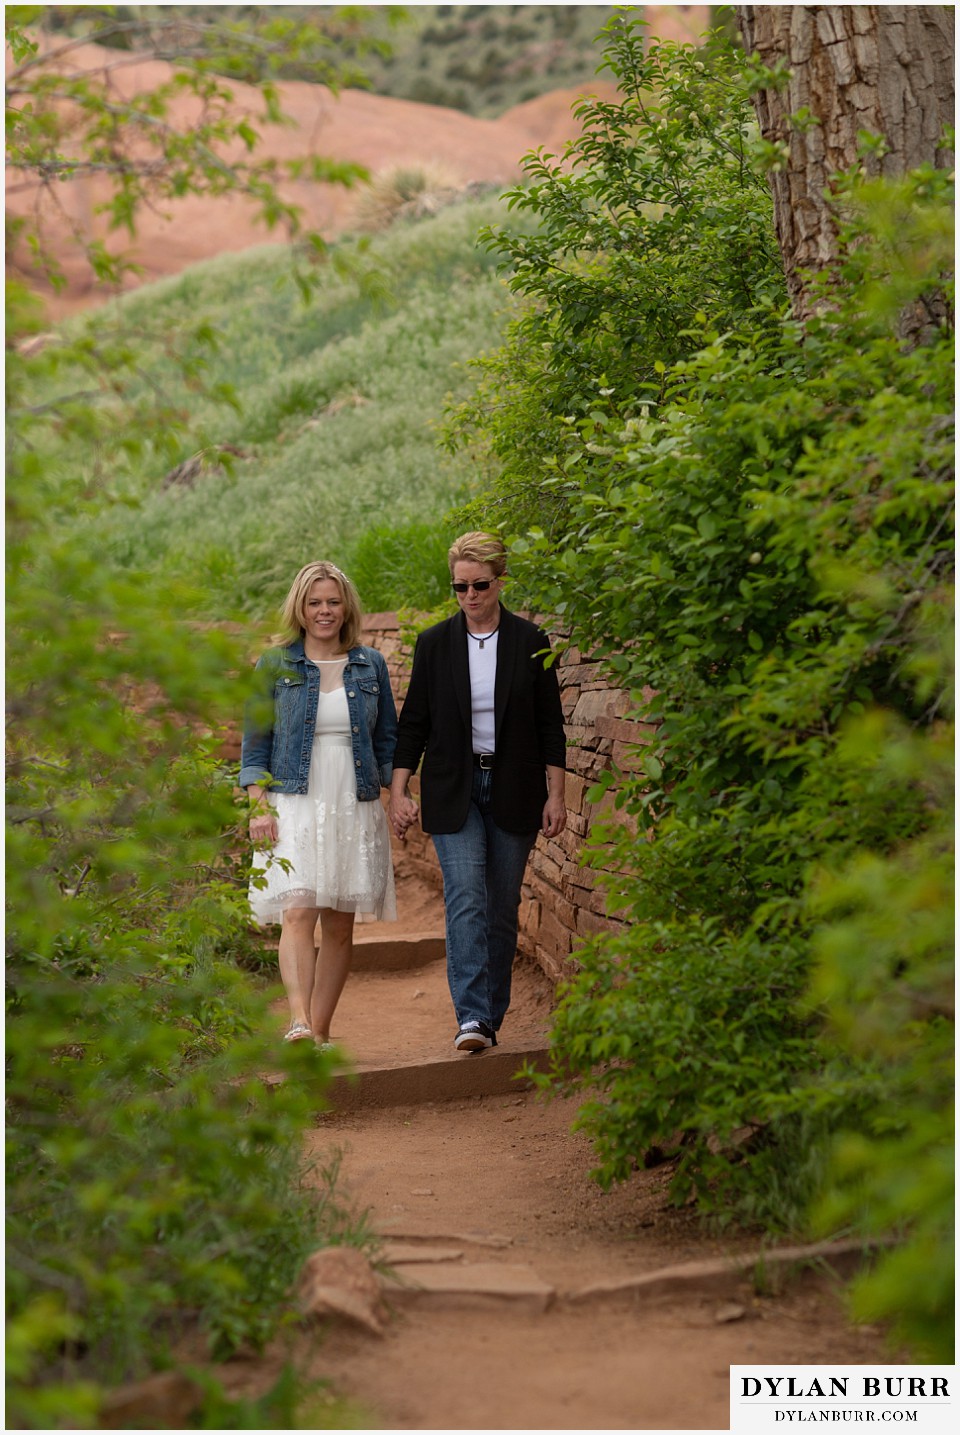 red rocks wedding morrison colorado couple walking together on an interesting green growth path